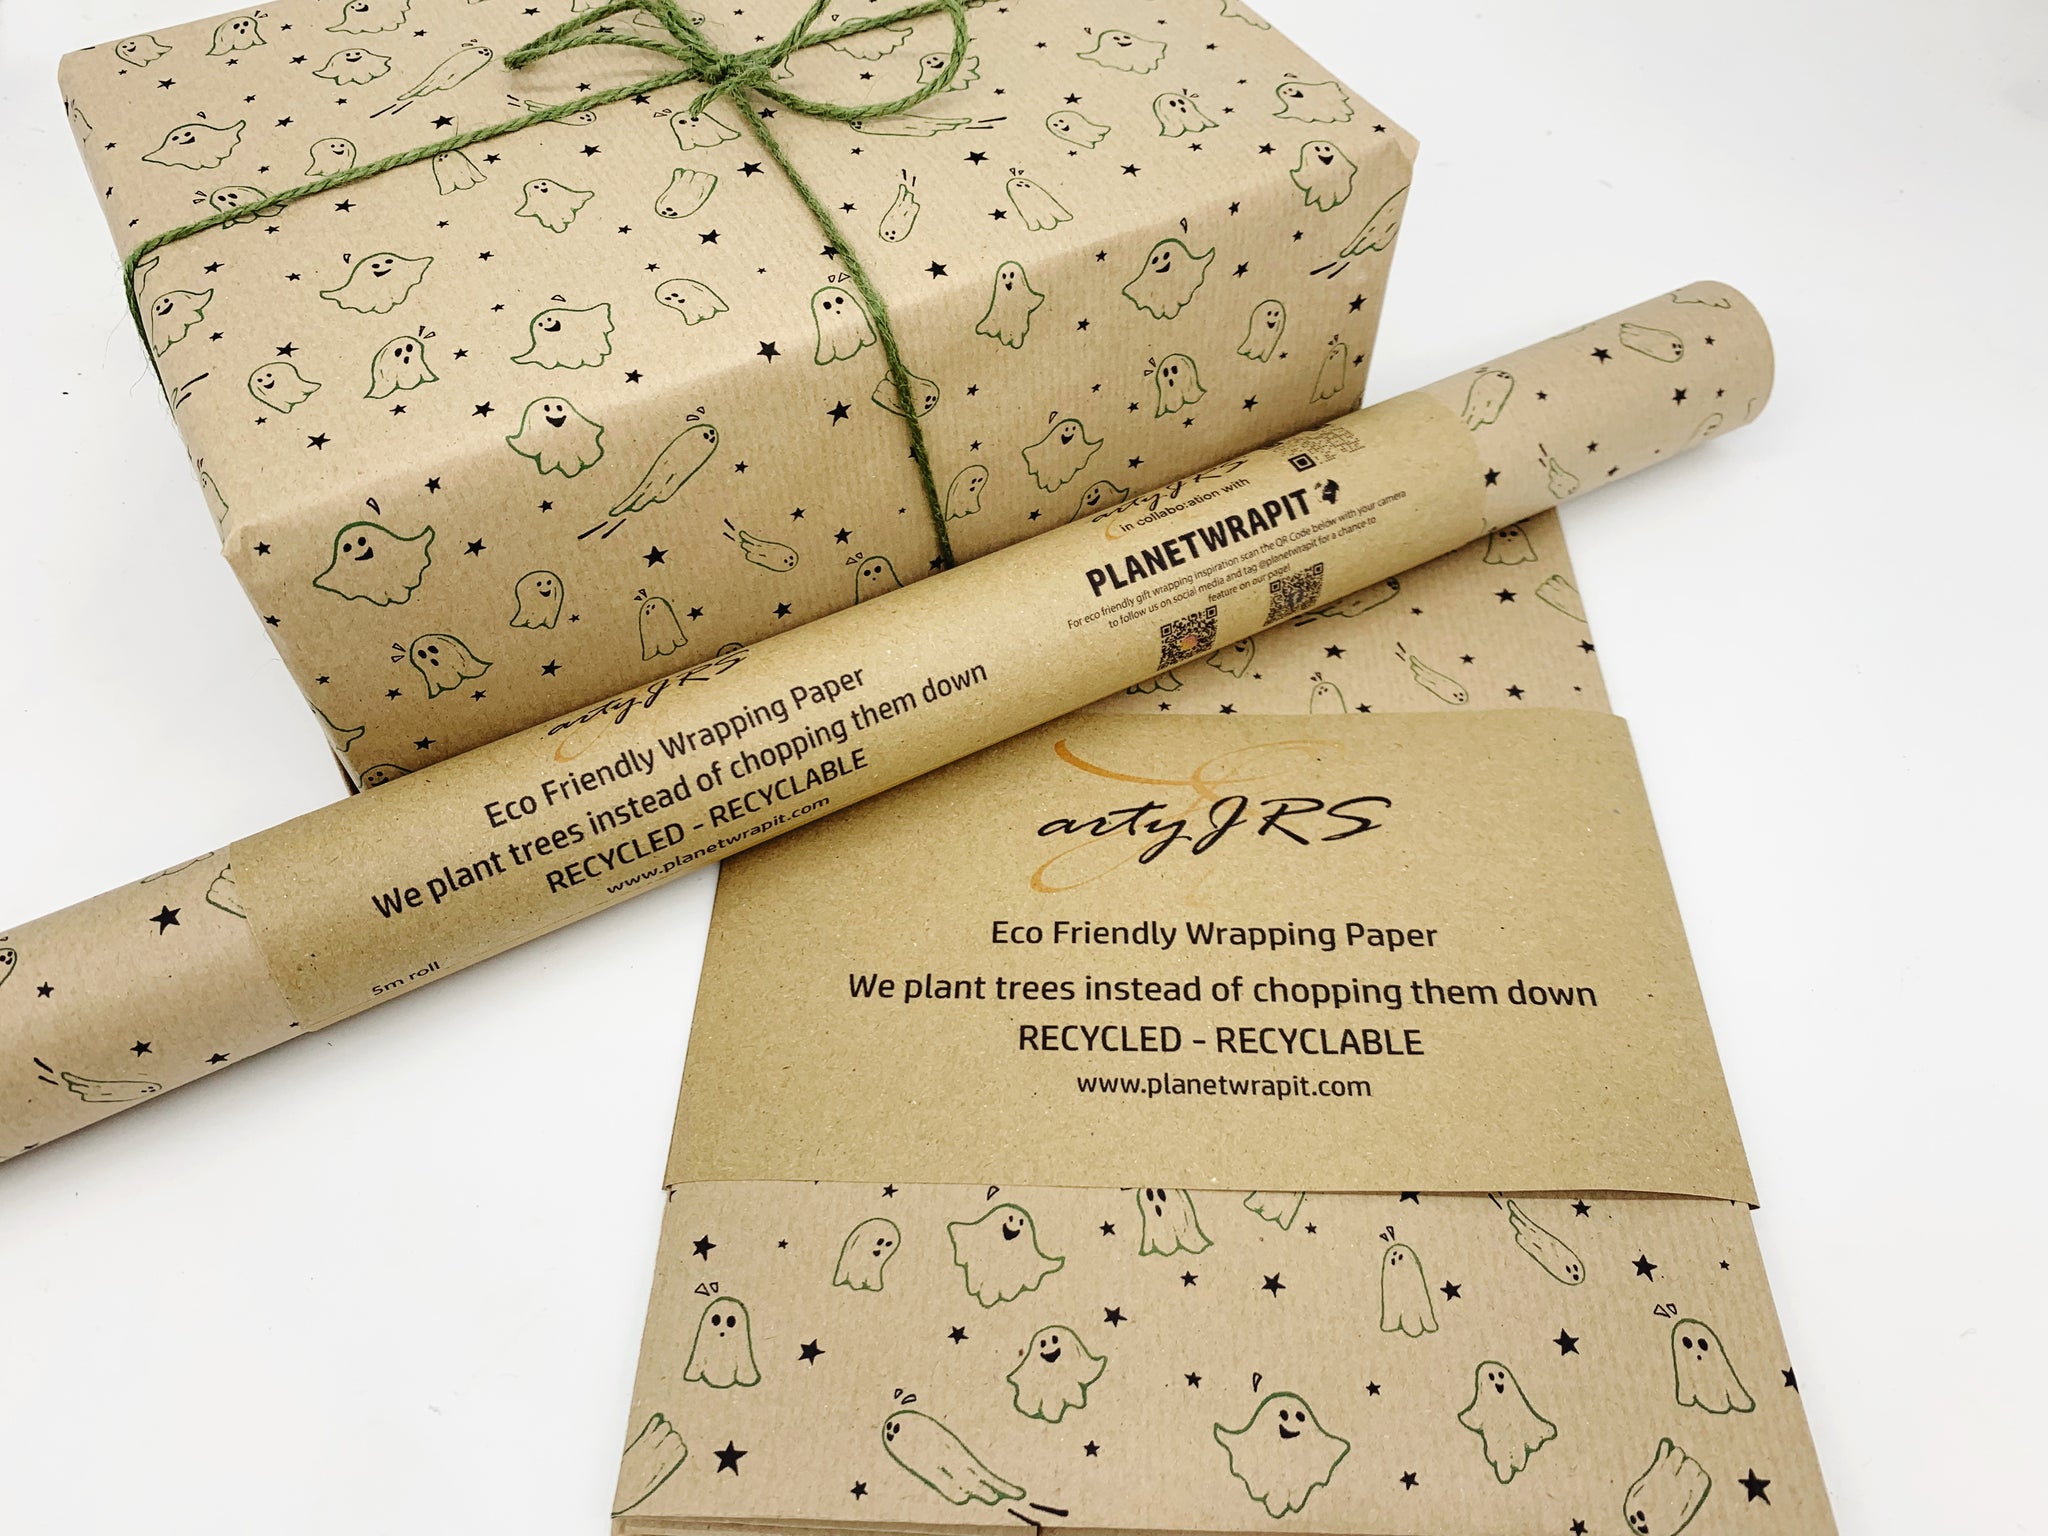 Doughtnut Recycled Wrapping Paper